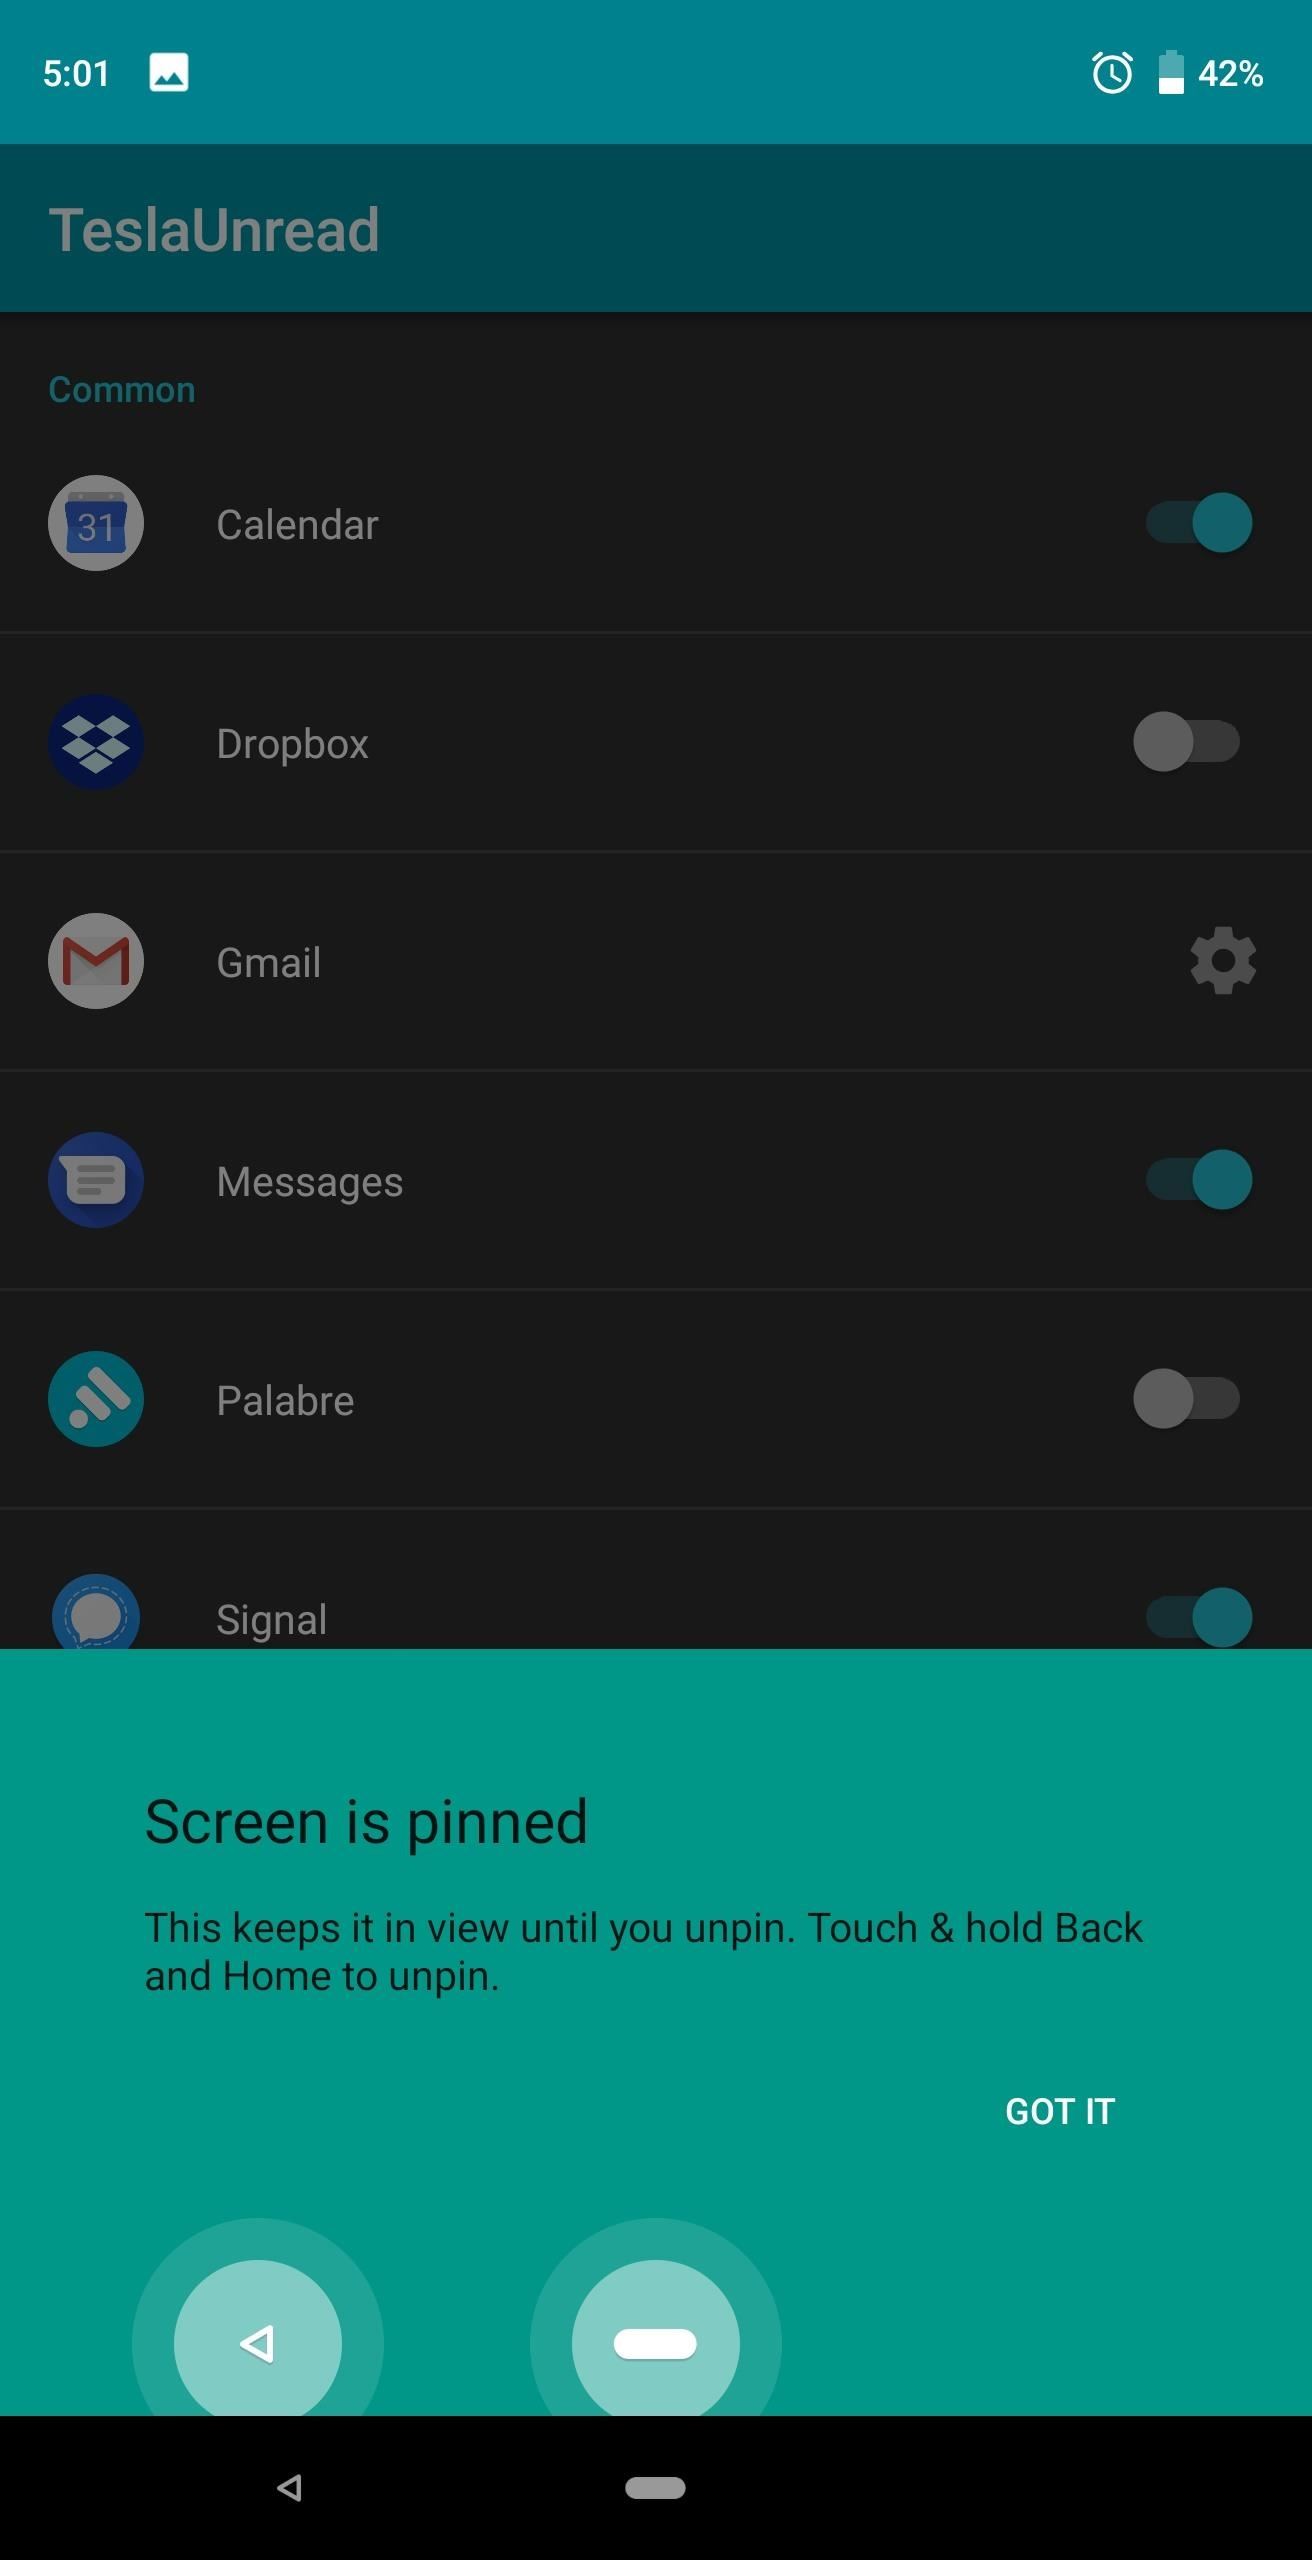 How to Use Screen Pinning in Android 9.0 Pie to Lock Apps in the Foreground